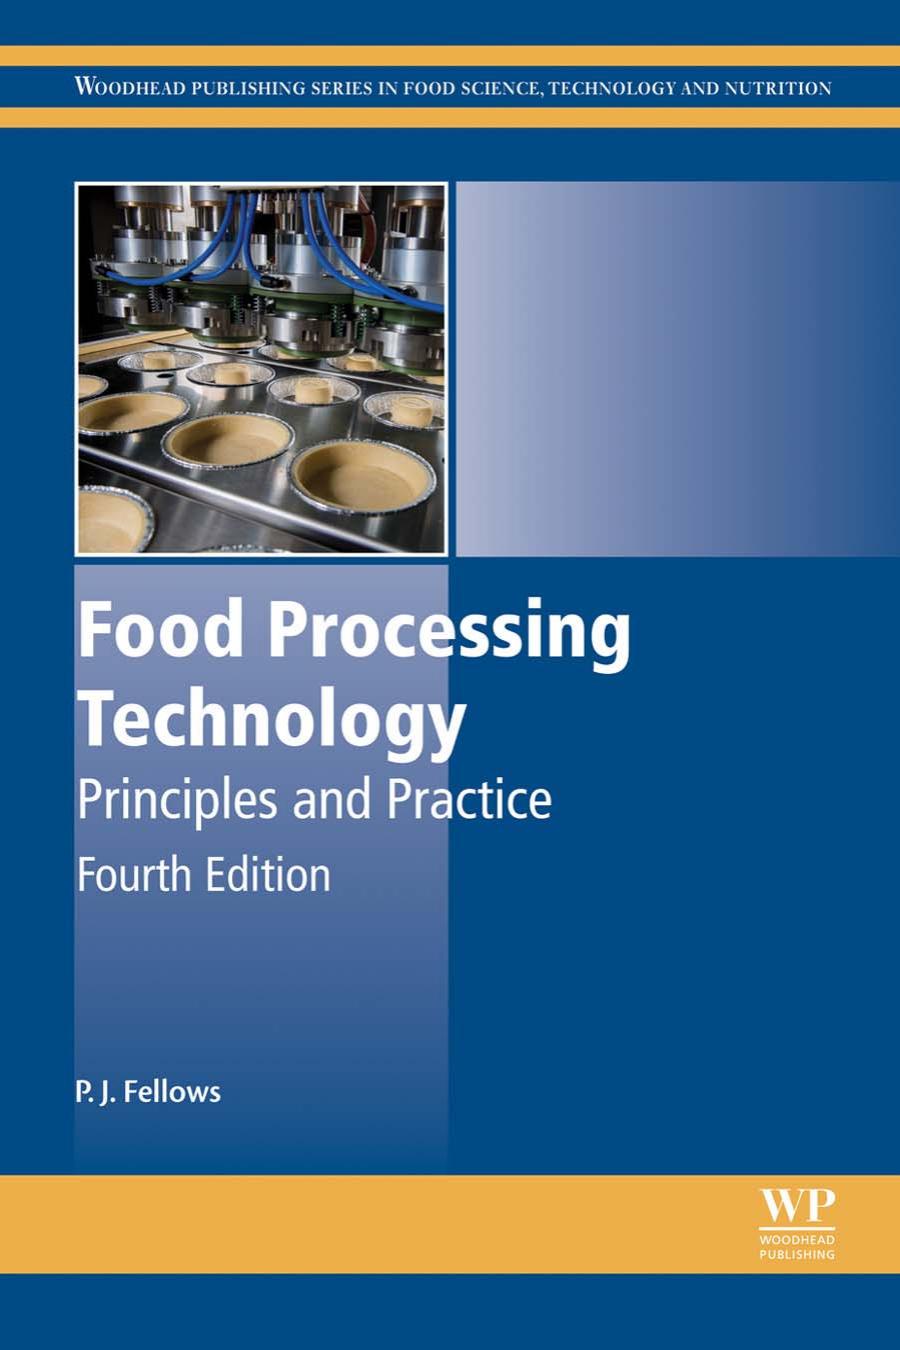 Food Processing Technology_ Principles and Practice - P.J. Fellows.jpg